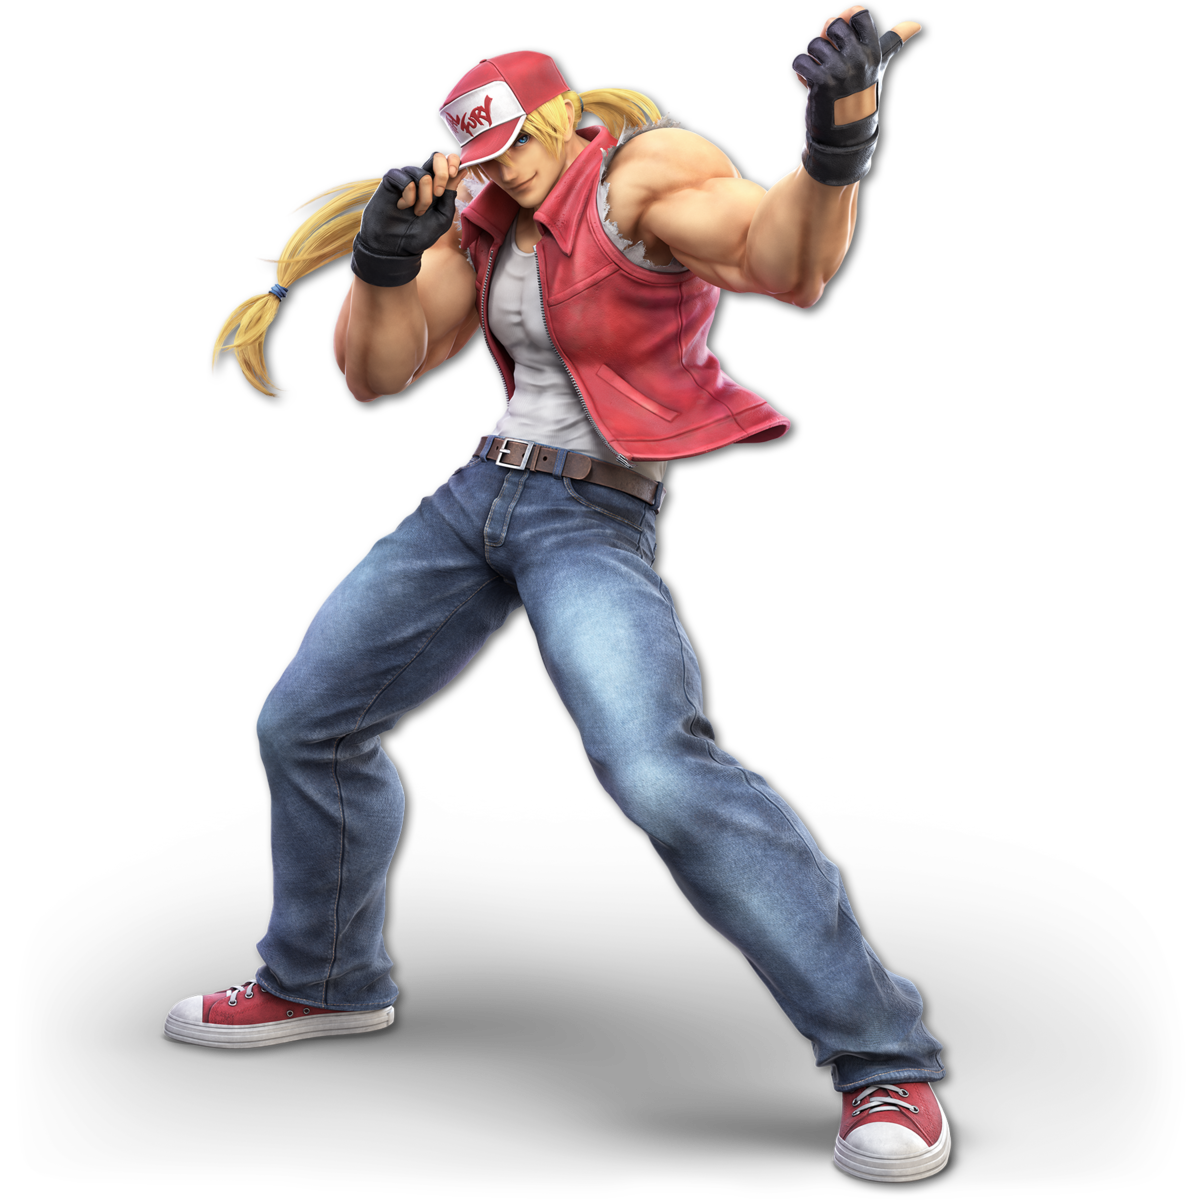 Super Smash Bros. Ultimate Terry. Select this character for for counters, counter tips, and more!